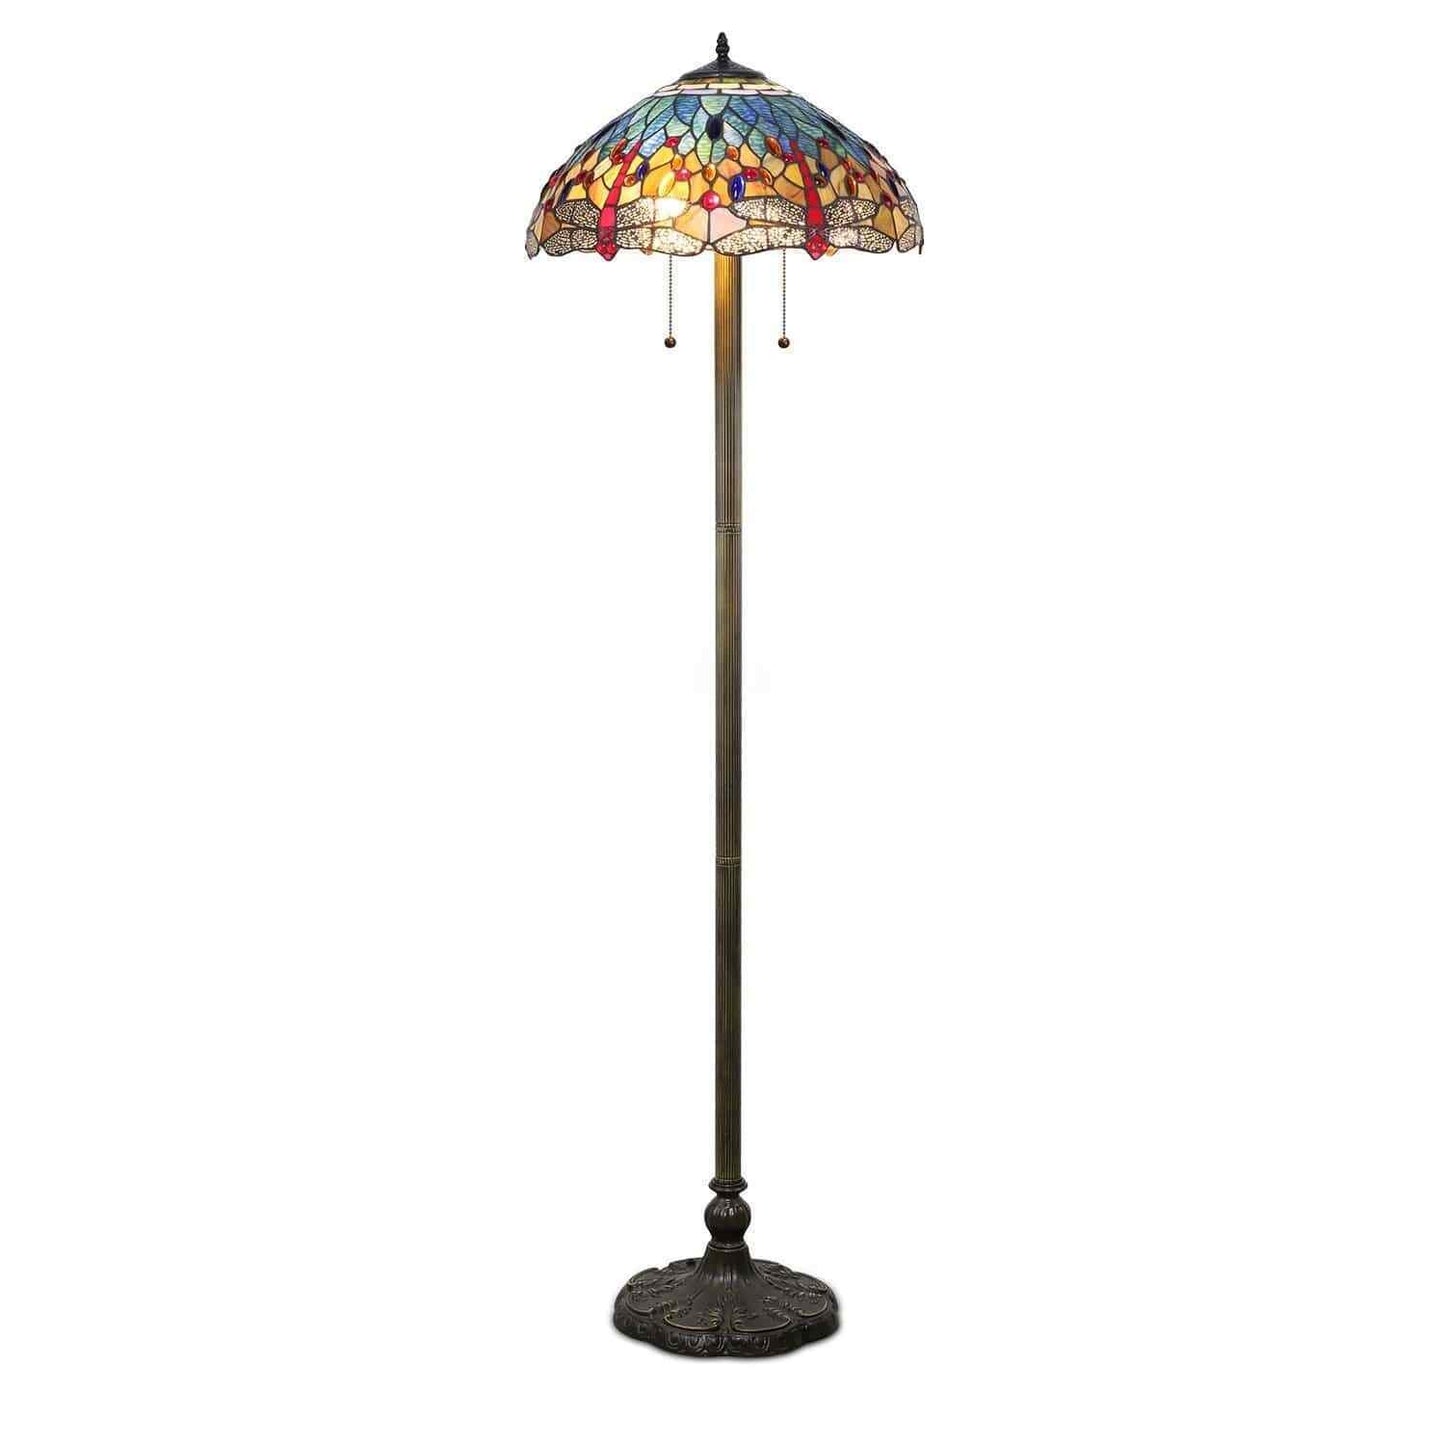 Blue and Gold Stained Glass Tiffany Style Dragonfly Theme Floor Lamp 60inT